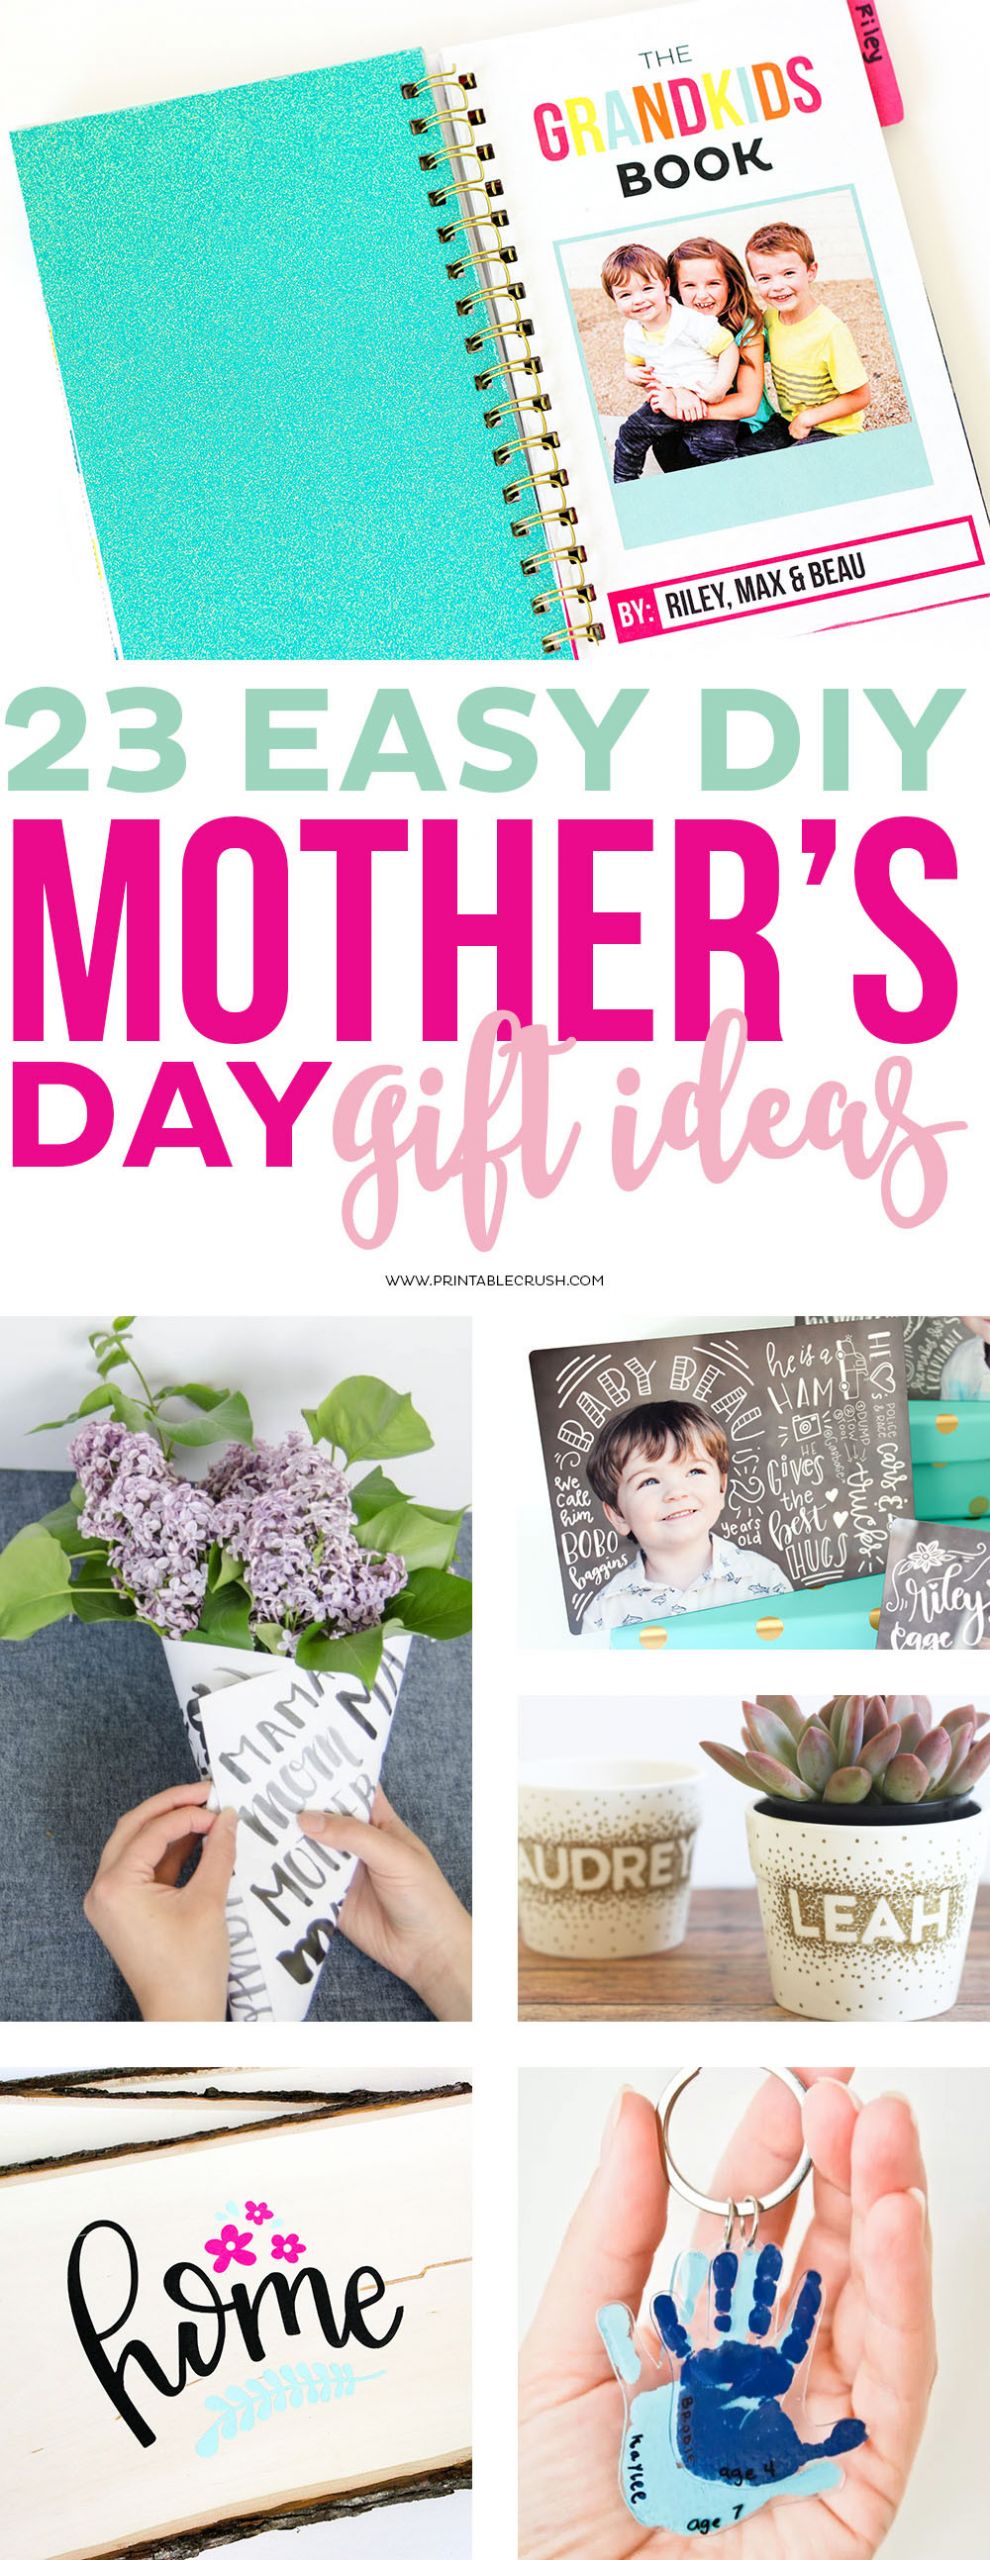 Mothers Day Gift Ideas Pinterest
 23 Easy DIY Mother s Day Gift Ideas Printable Crush